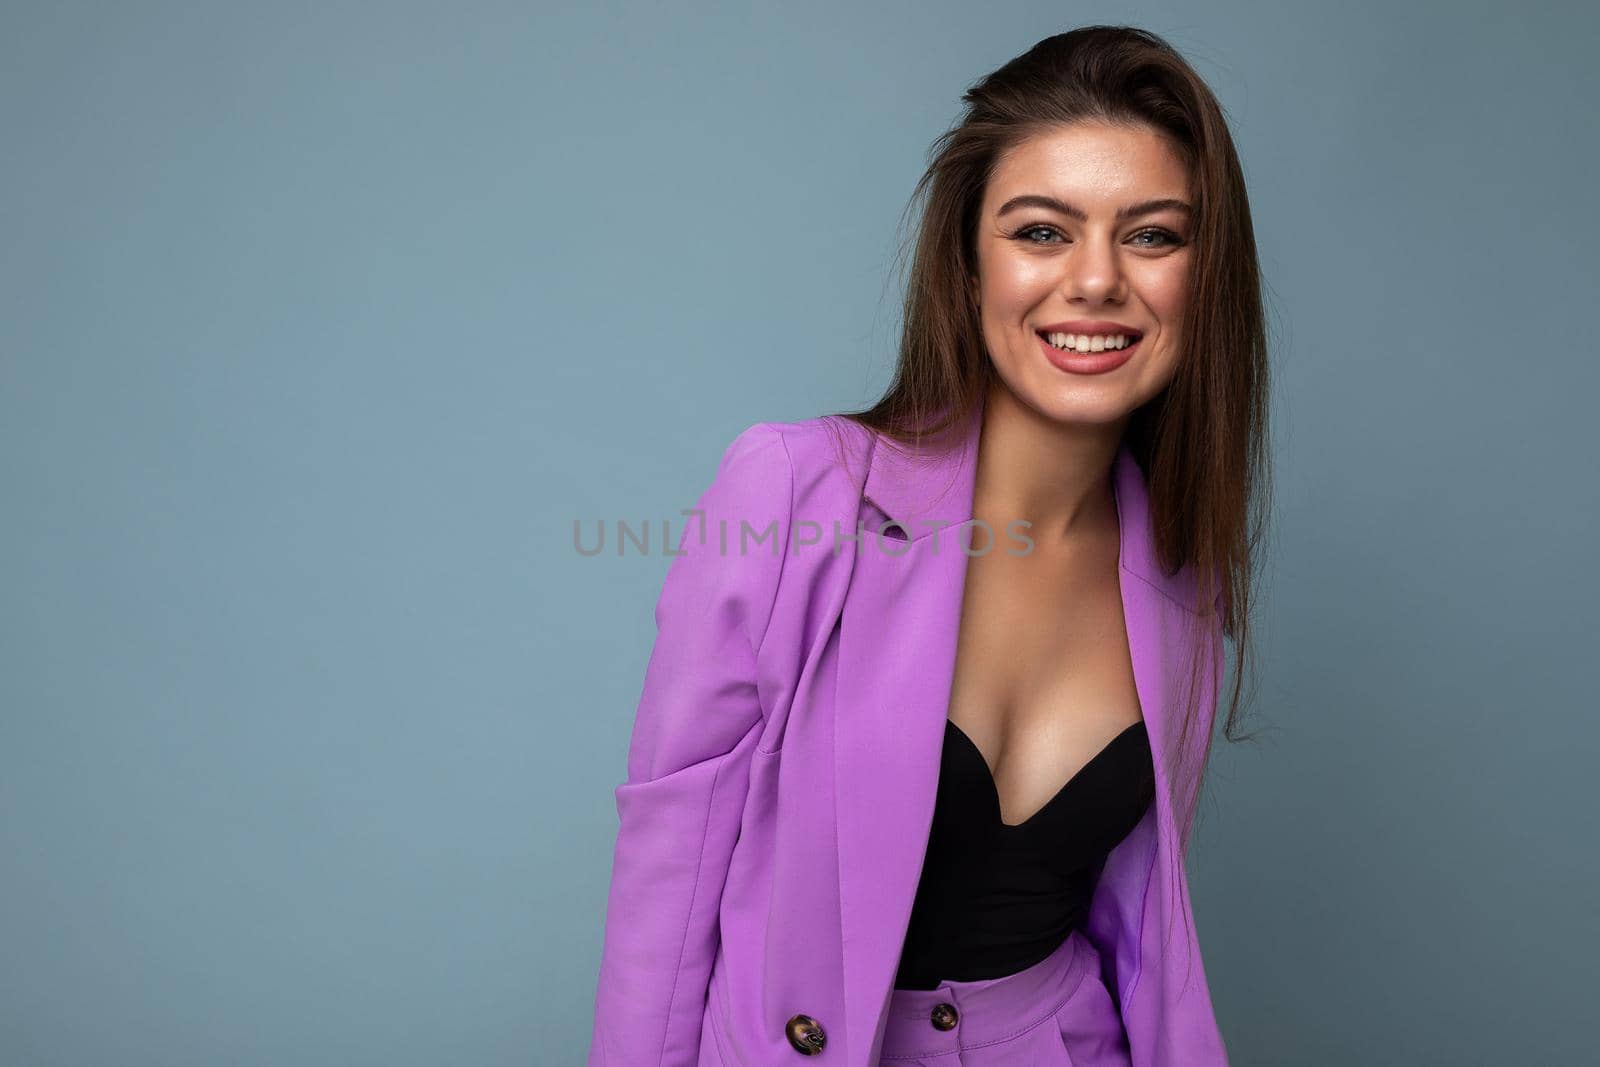 Young happy smiling brunette woman nice-looking attractive charming elegant fashionable wearing stylish suit with jacket isolated over blue background with copy space. Fun anf joy concept.